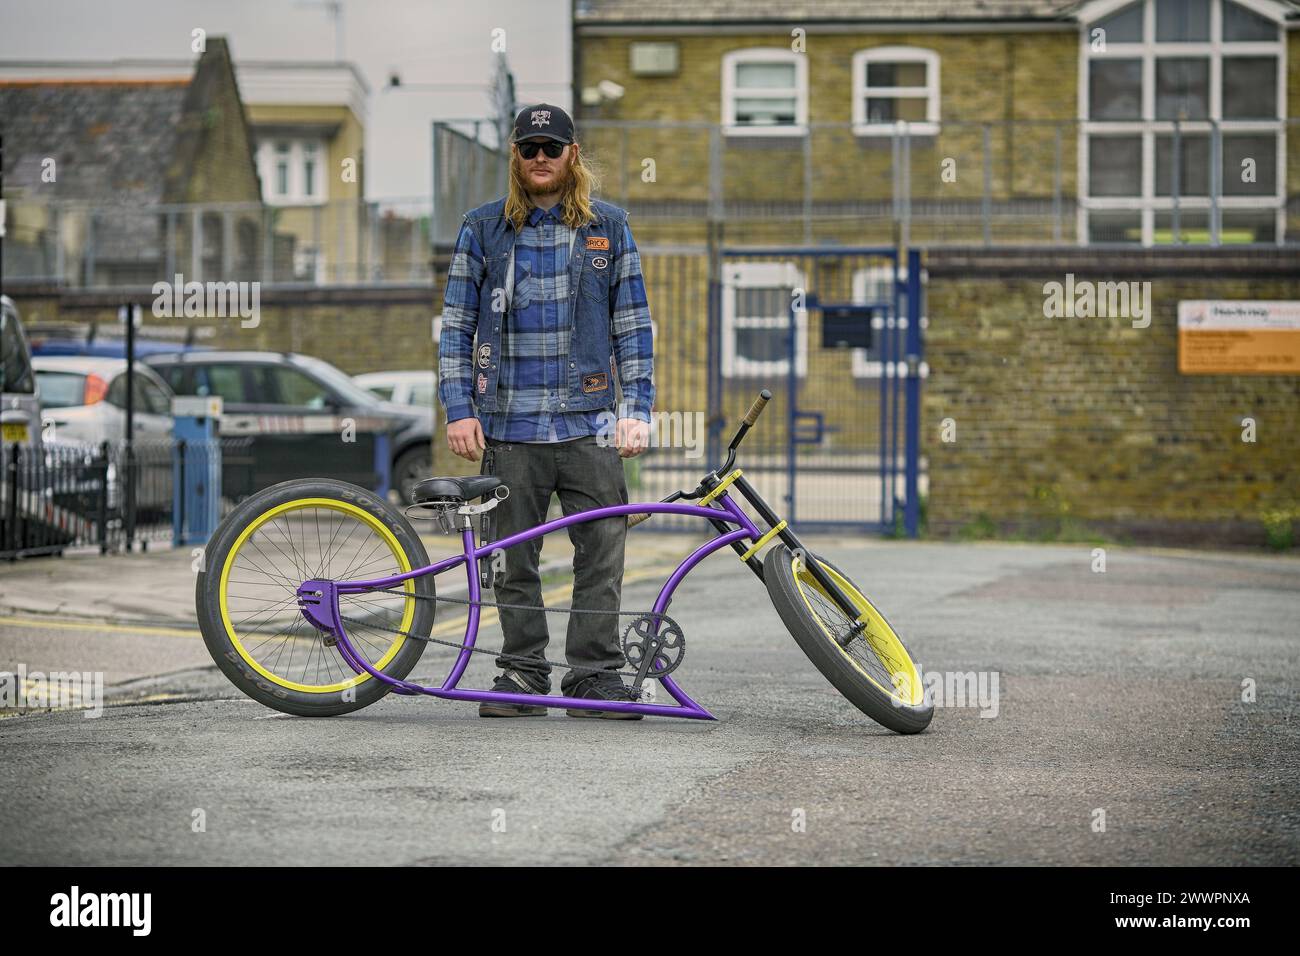 GREAT BRITAIN /London / Custom Bicycle Club / Lowrider BC London/ Elliot Bromley from Custom Bicycle Club Lowrider BC at Kustom Velocity ride in Londo Stock Photo